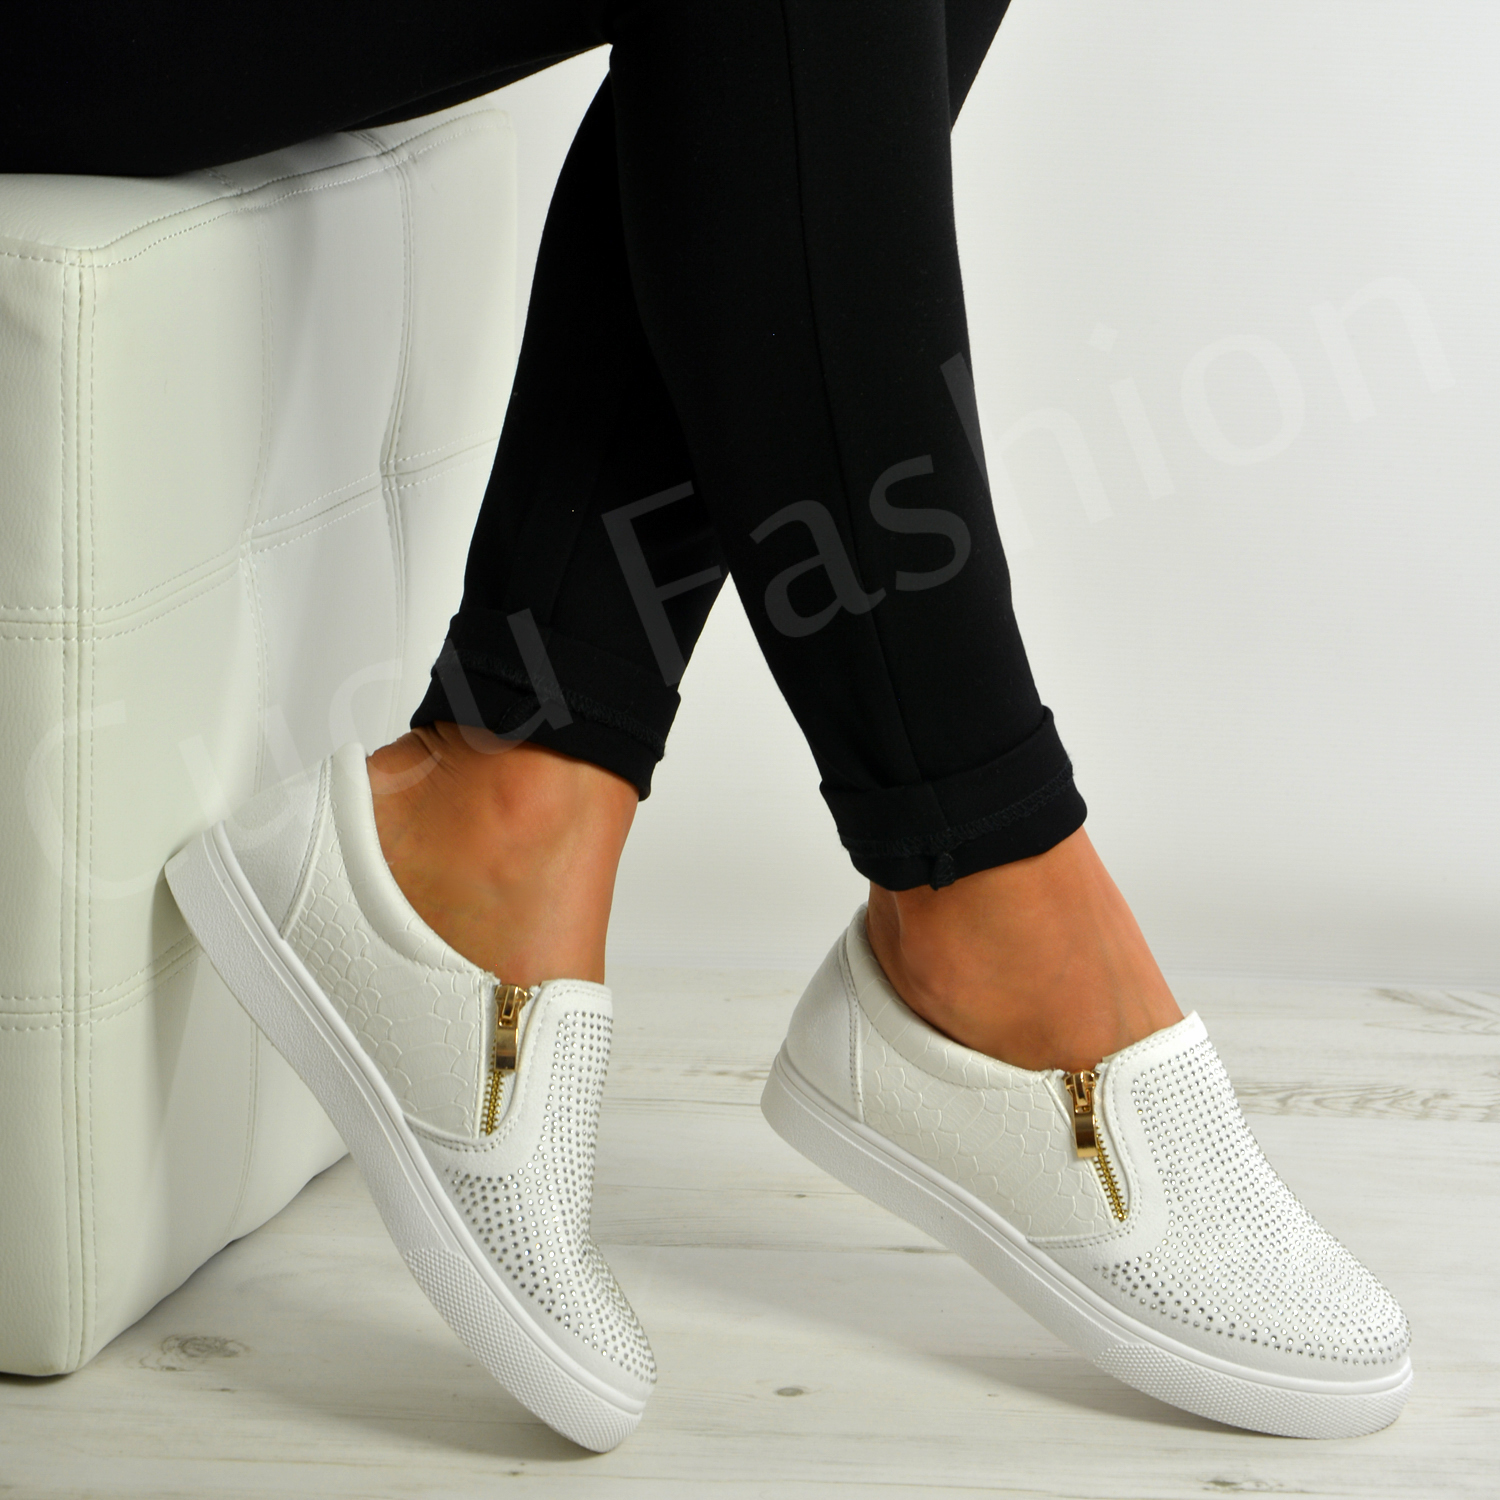 New Womens Ladies Slip On Studded Flat Trainers Zip Shoes Size Uk 3-8 ...